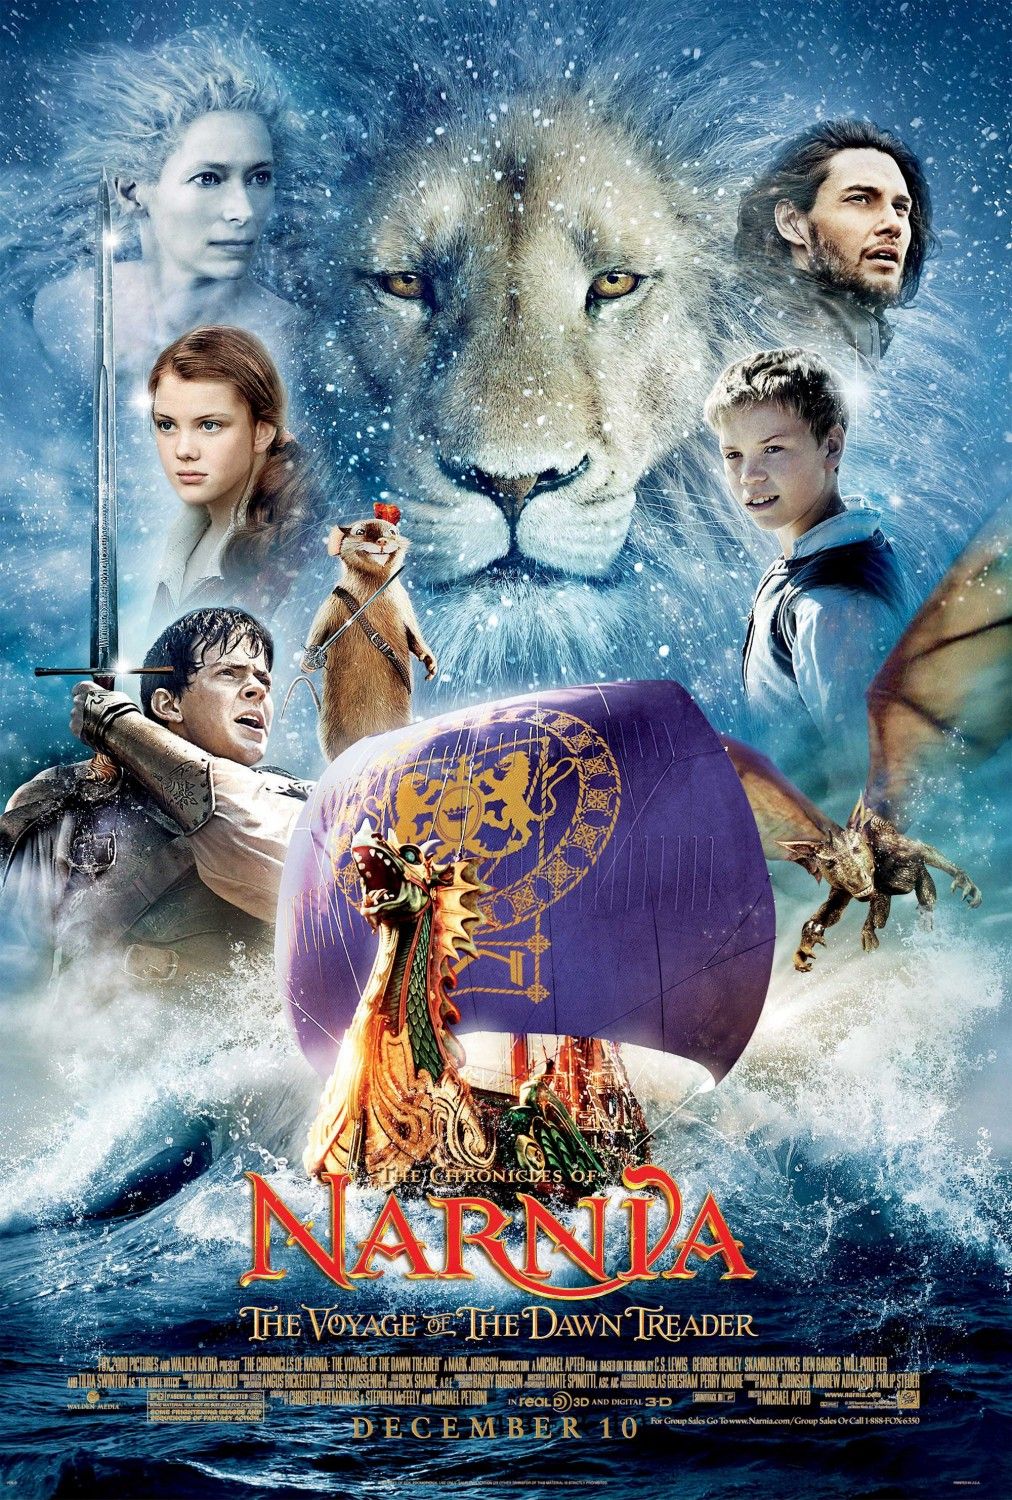 Extra Large Movie Poster Image for The Chronicles of Narnia: The Voyage of the Dawn Treader (#3 of 7)